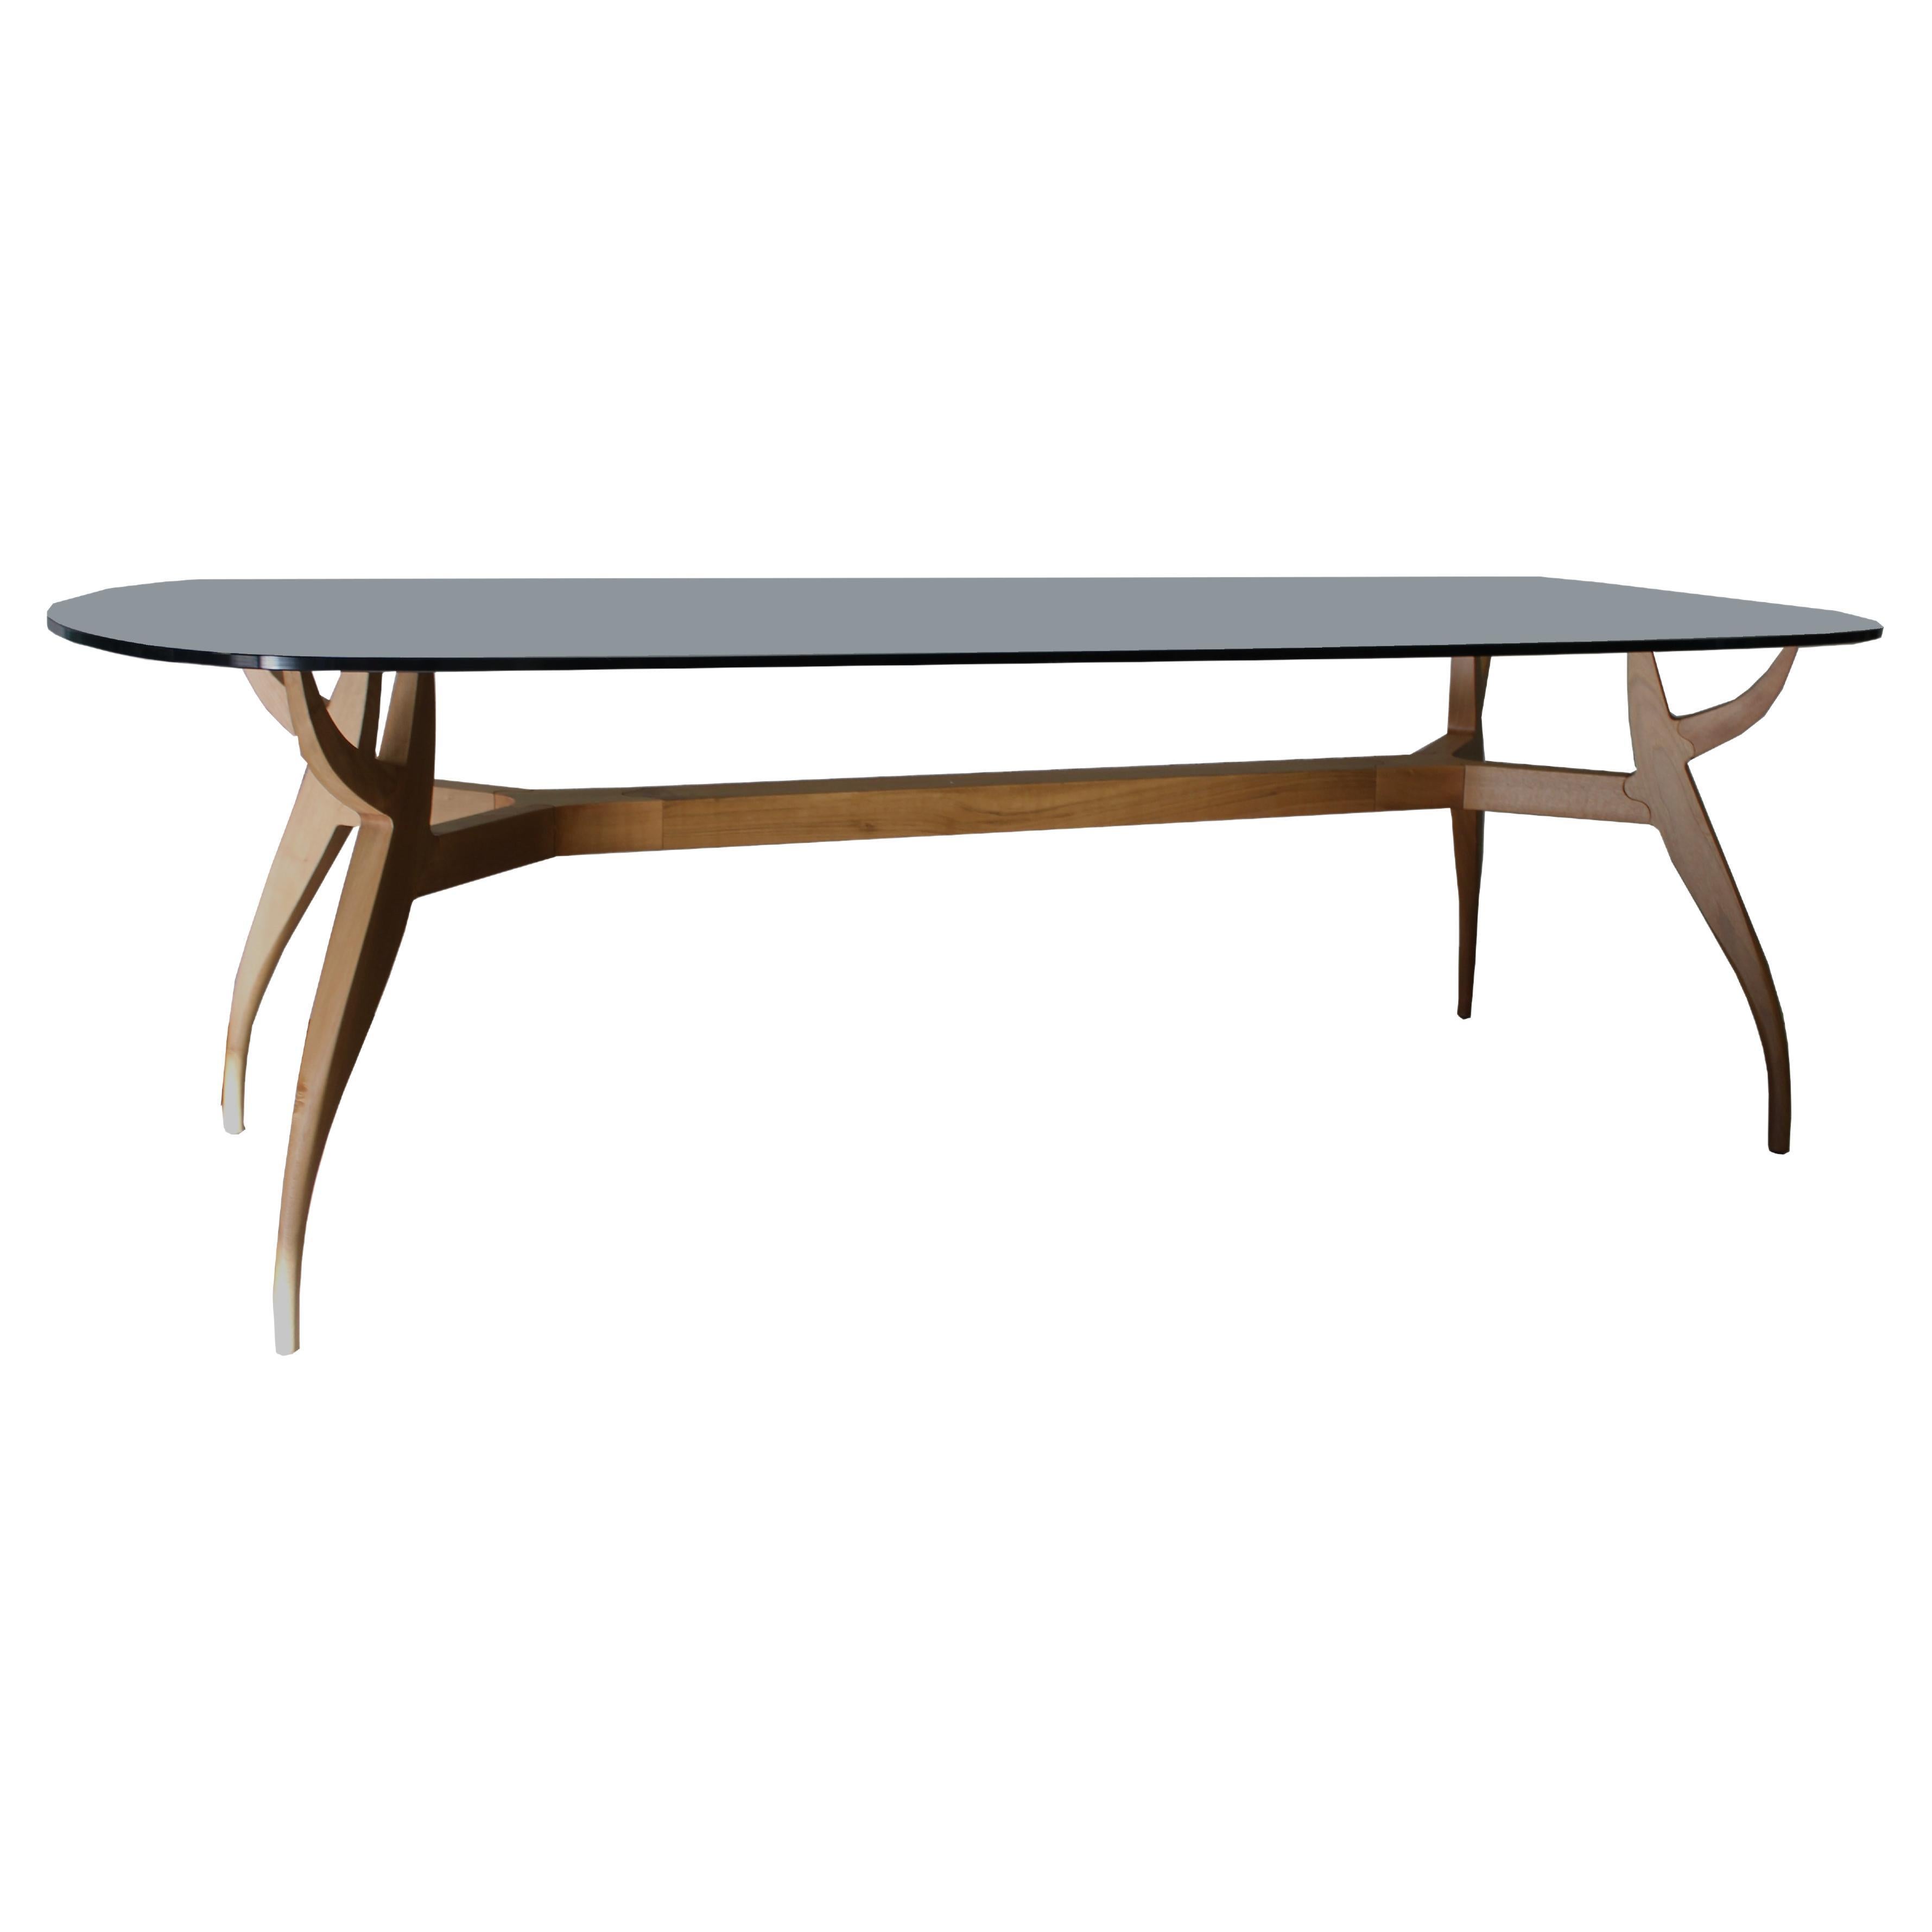 STAG Walnut Wood Dining Table with Glass Top designed by Nigel Coats